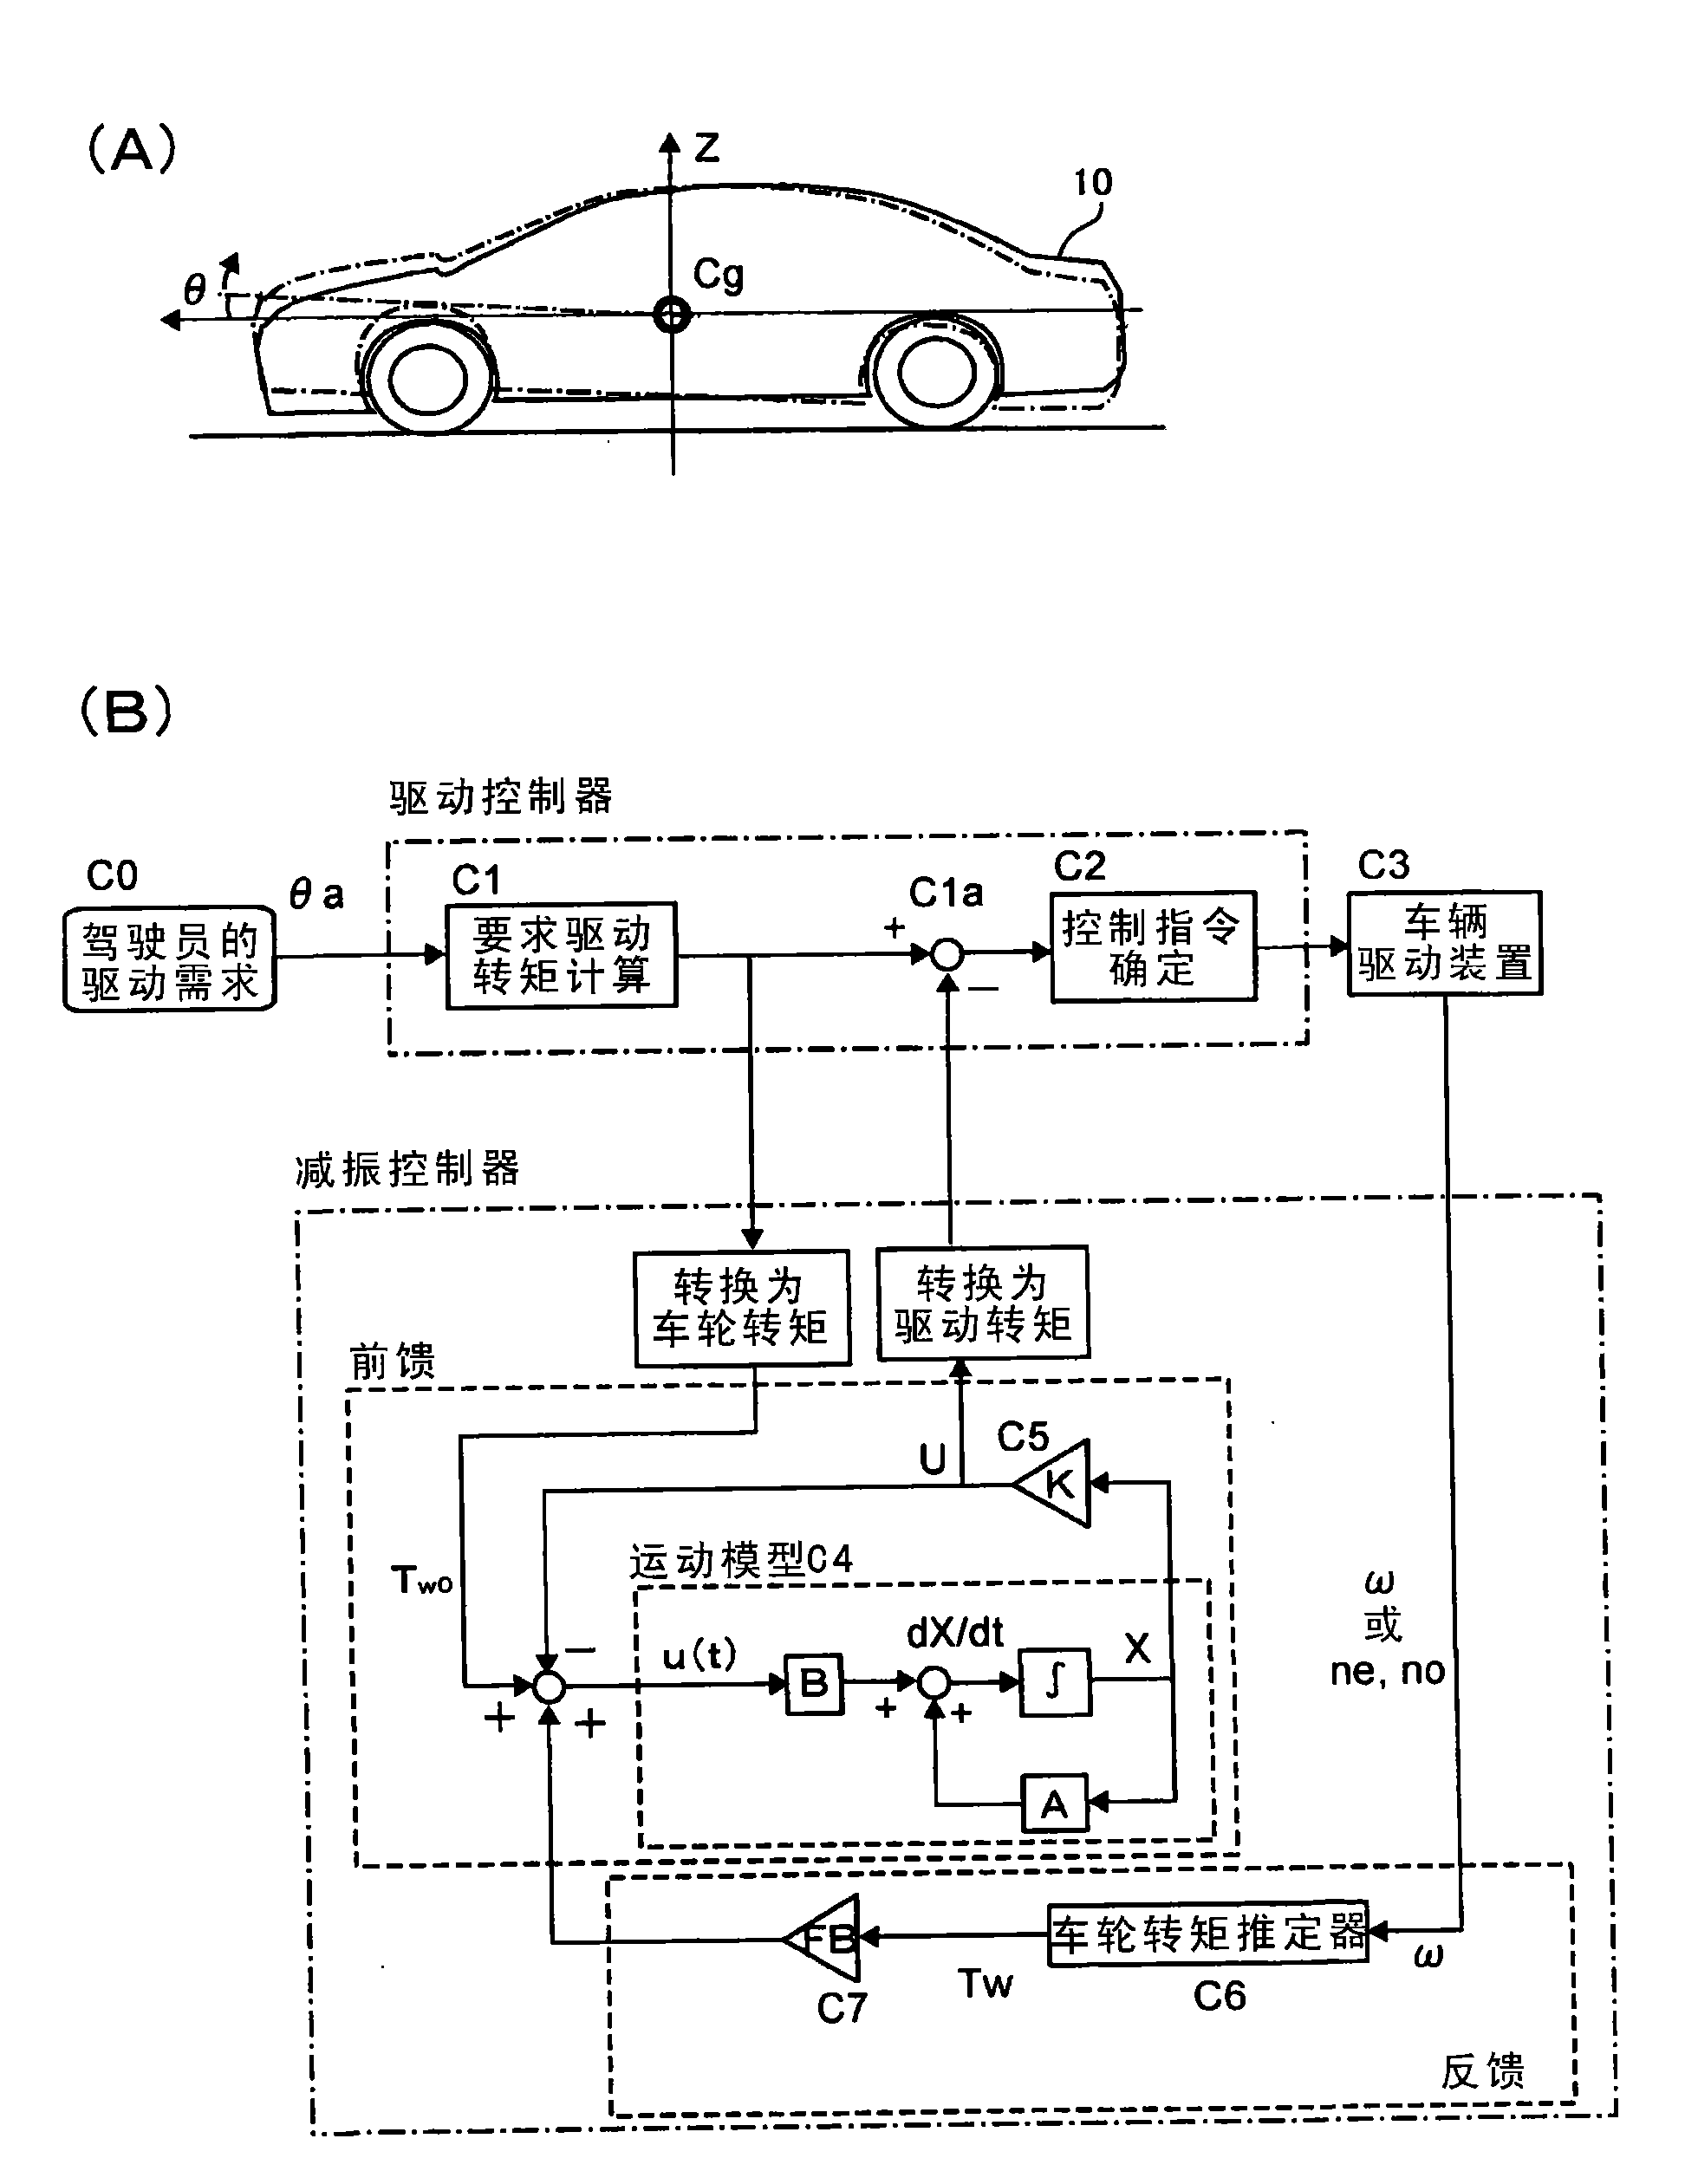 Vibration-damping control device for vehicle